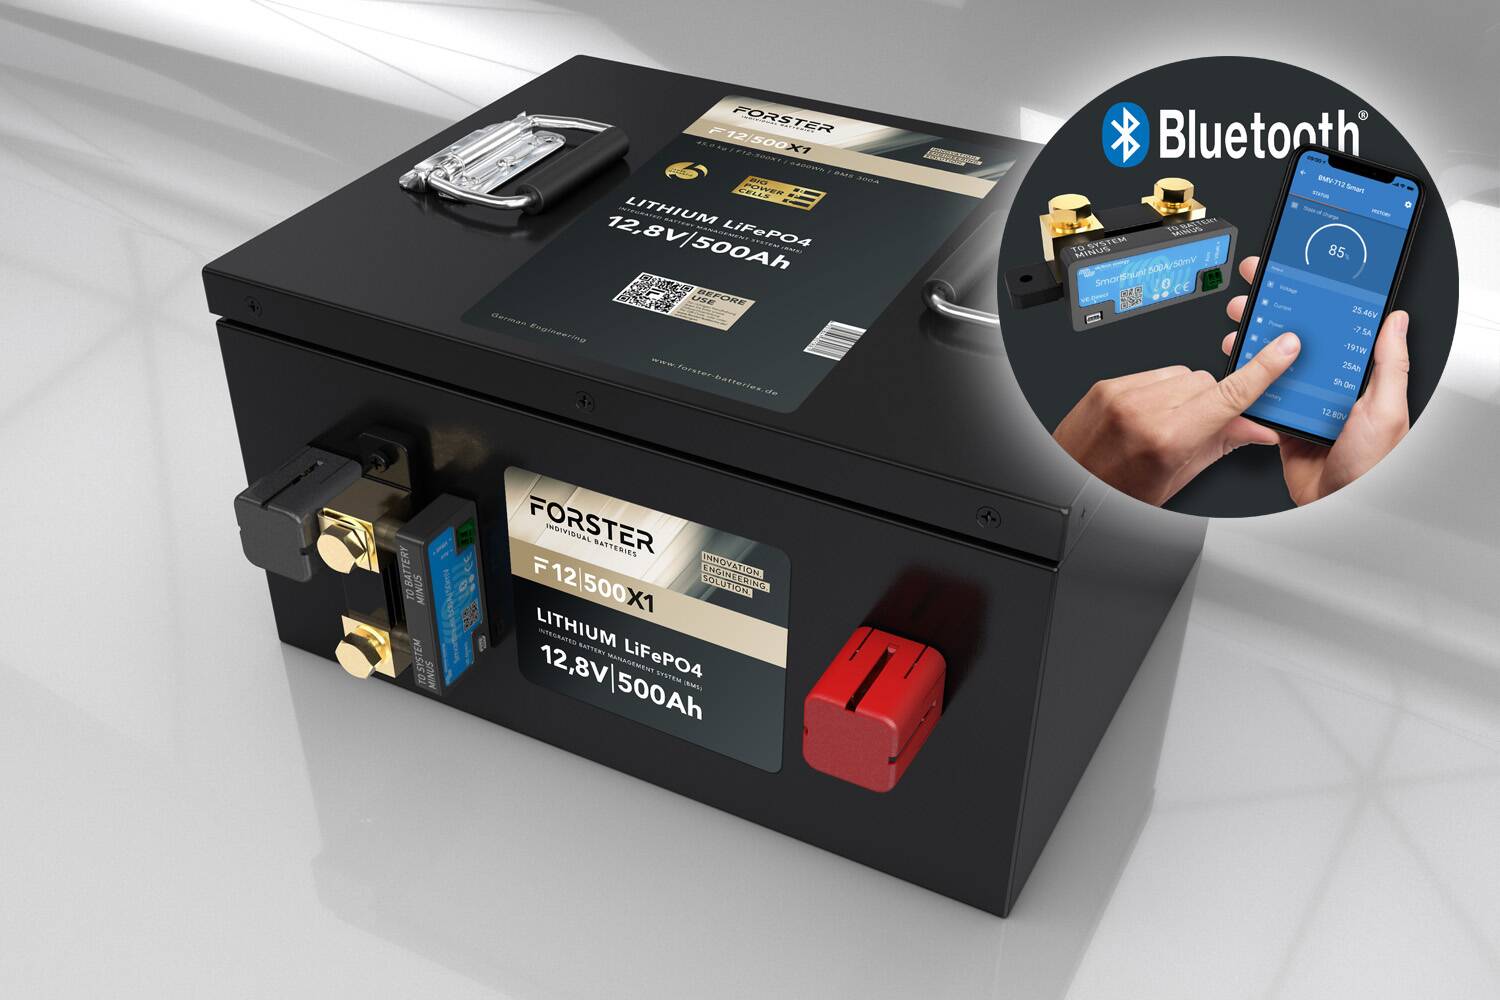 FORSTER 500Ah 12,8V Lithium LiFePO4 Premium Batterie  300A-BMS-2.0  500A Bluetooth Mess-Shunt  Ducato Ford PSA  6400Wh